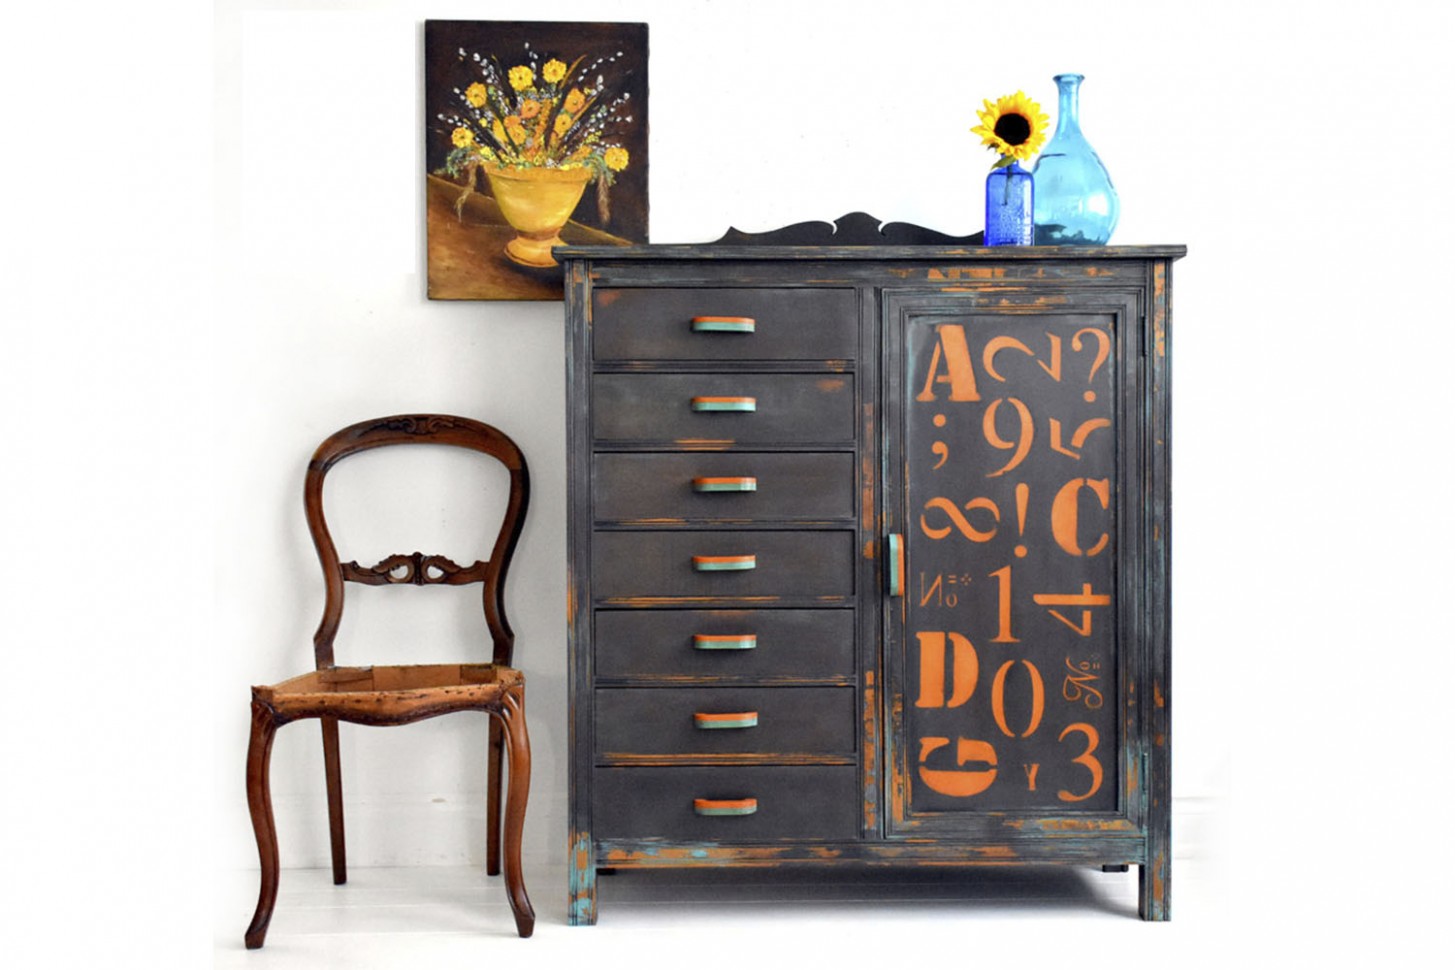 How To Upgrade Old Furniture In An Afternoon | Better Homes And ..